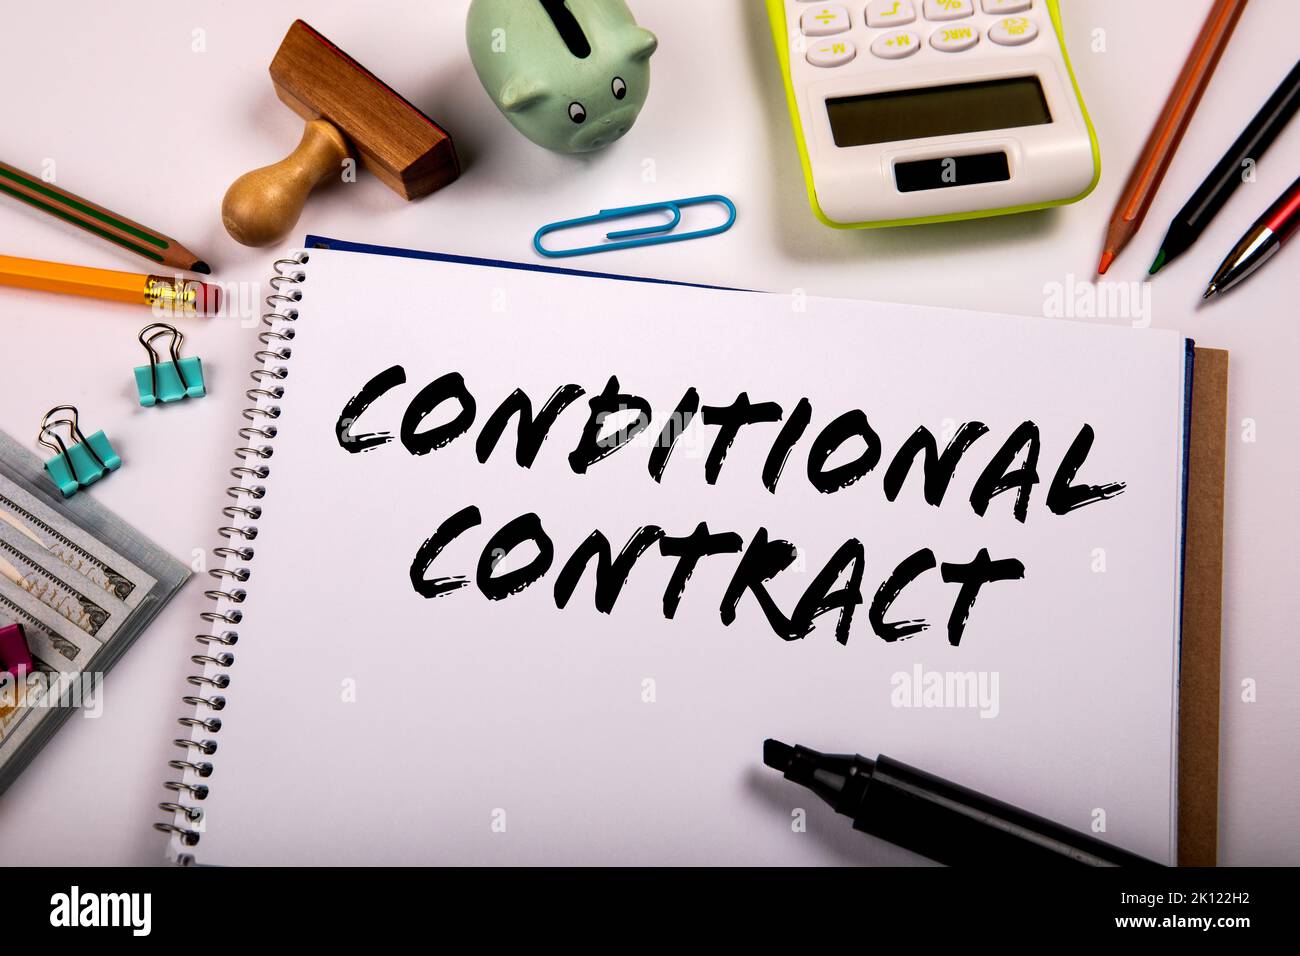 Conditional Contract. Conditional Contract text written on a notebook. Office supplies on a white background. Stock Photo